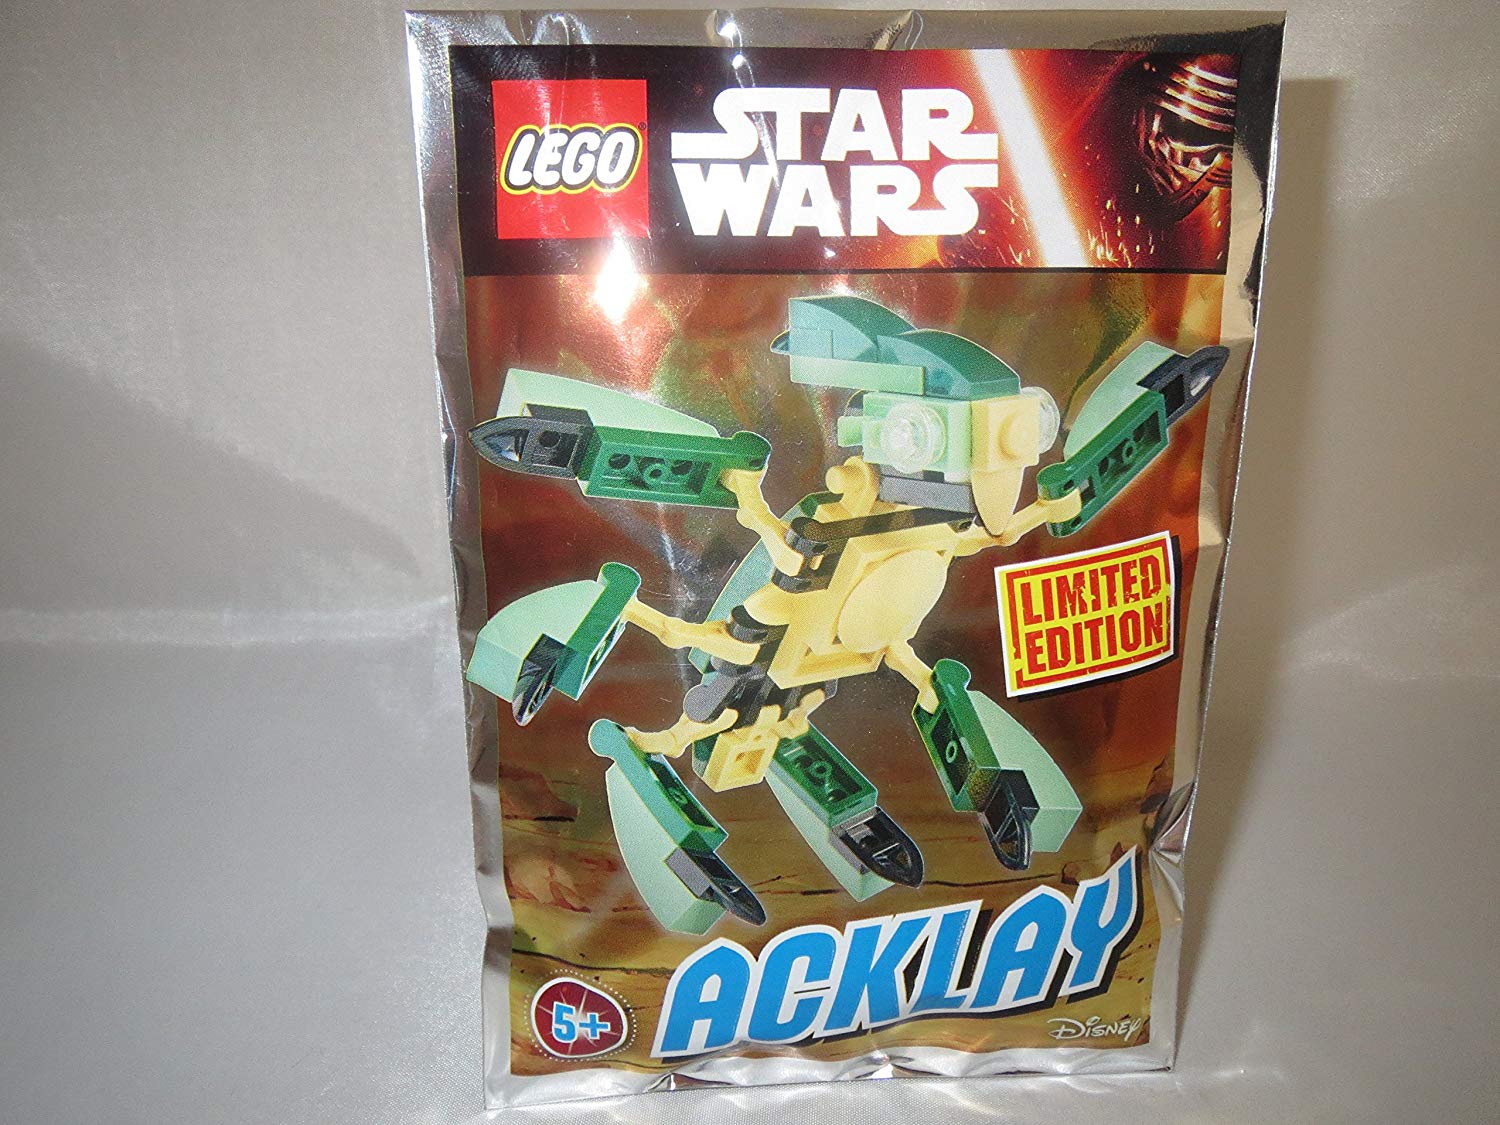 LEGO Star Wars Acklay – Limited Edition – 911612 – Polybag – Blue Ocean